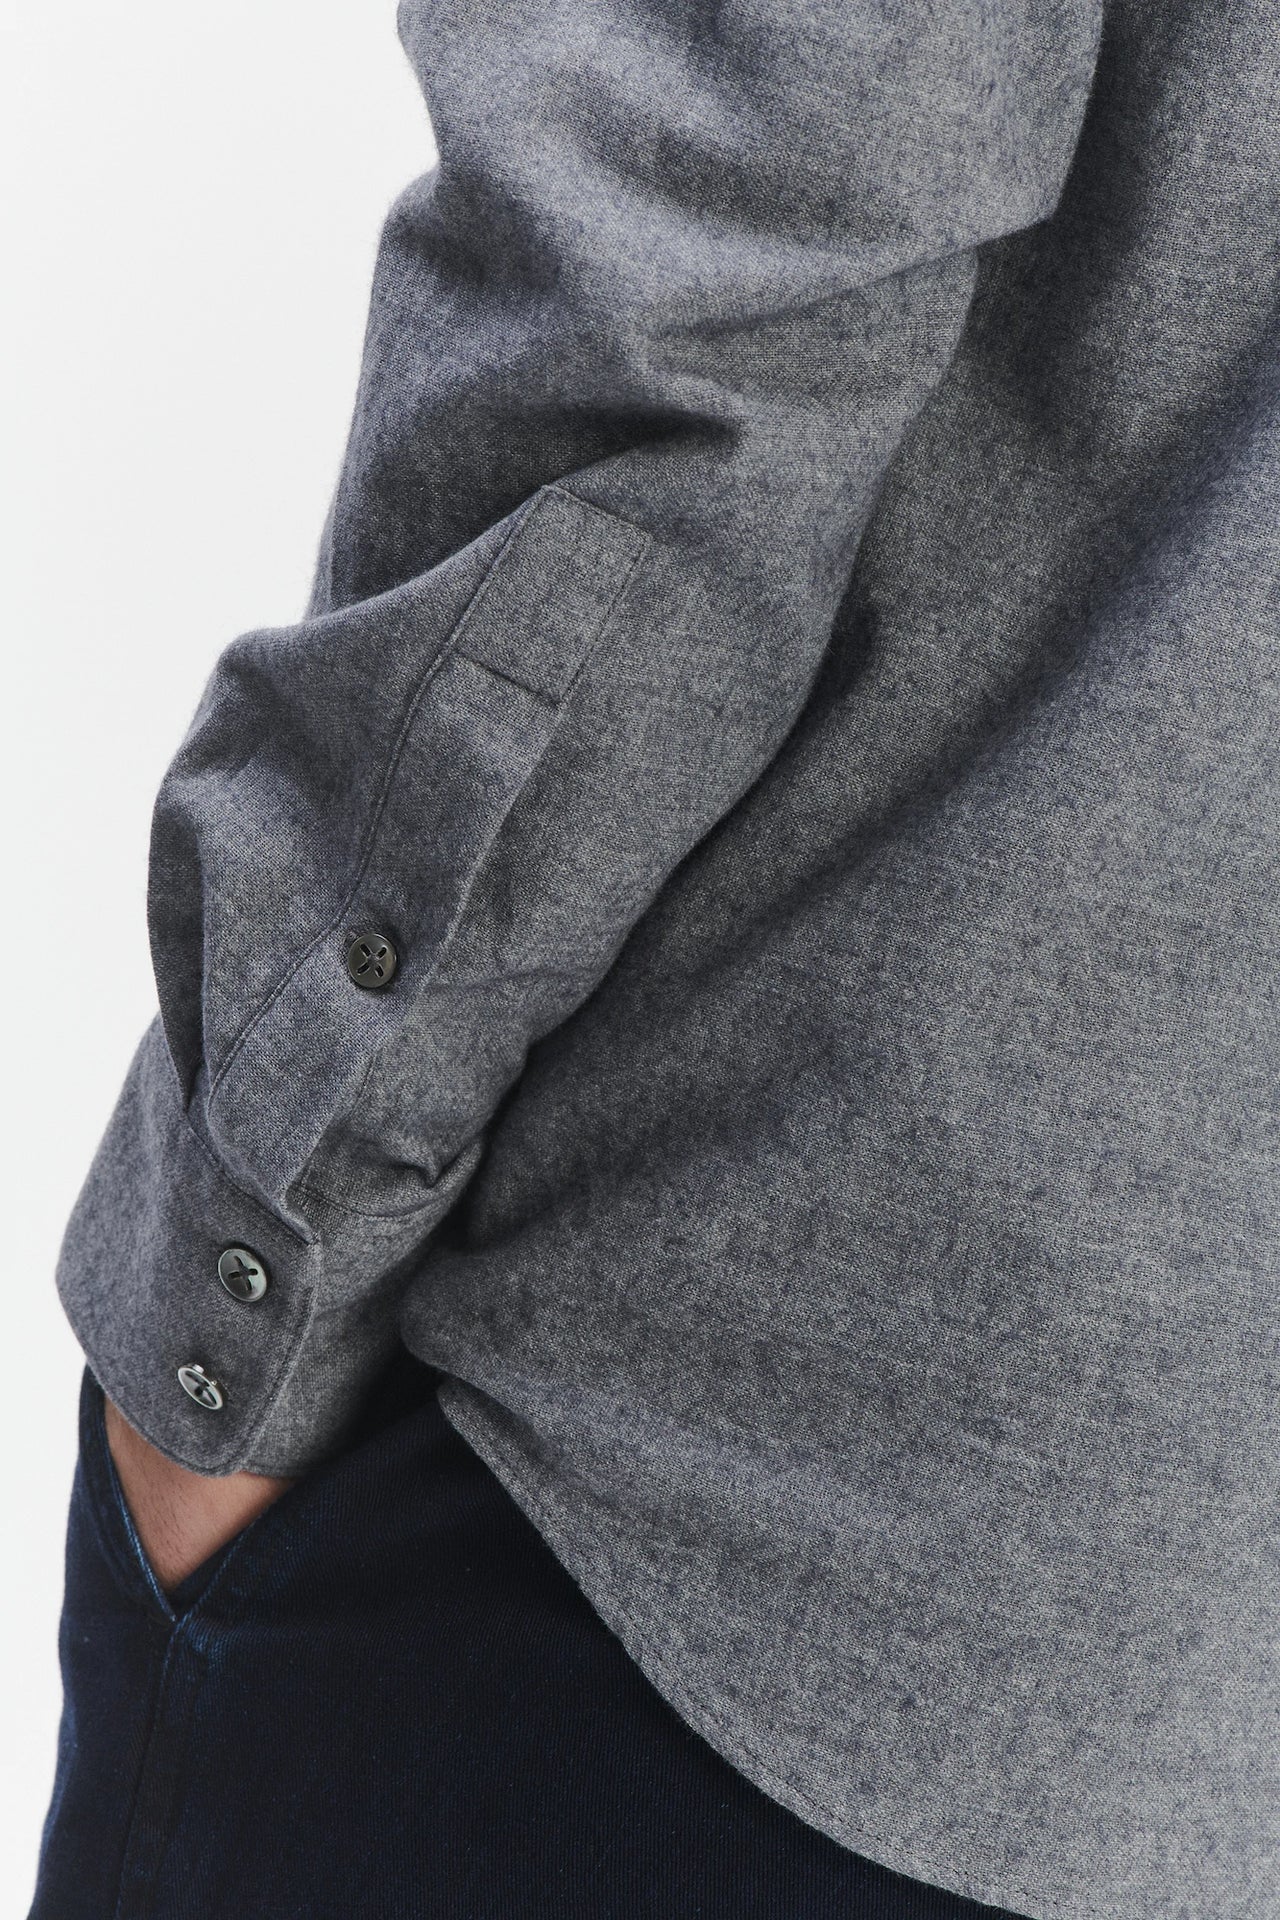 Feel Good Shirt in the Finest Mix of Soft Grey Italian Cotton and Virgin Wool